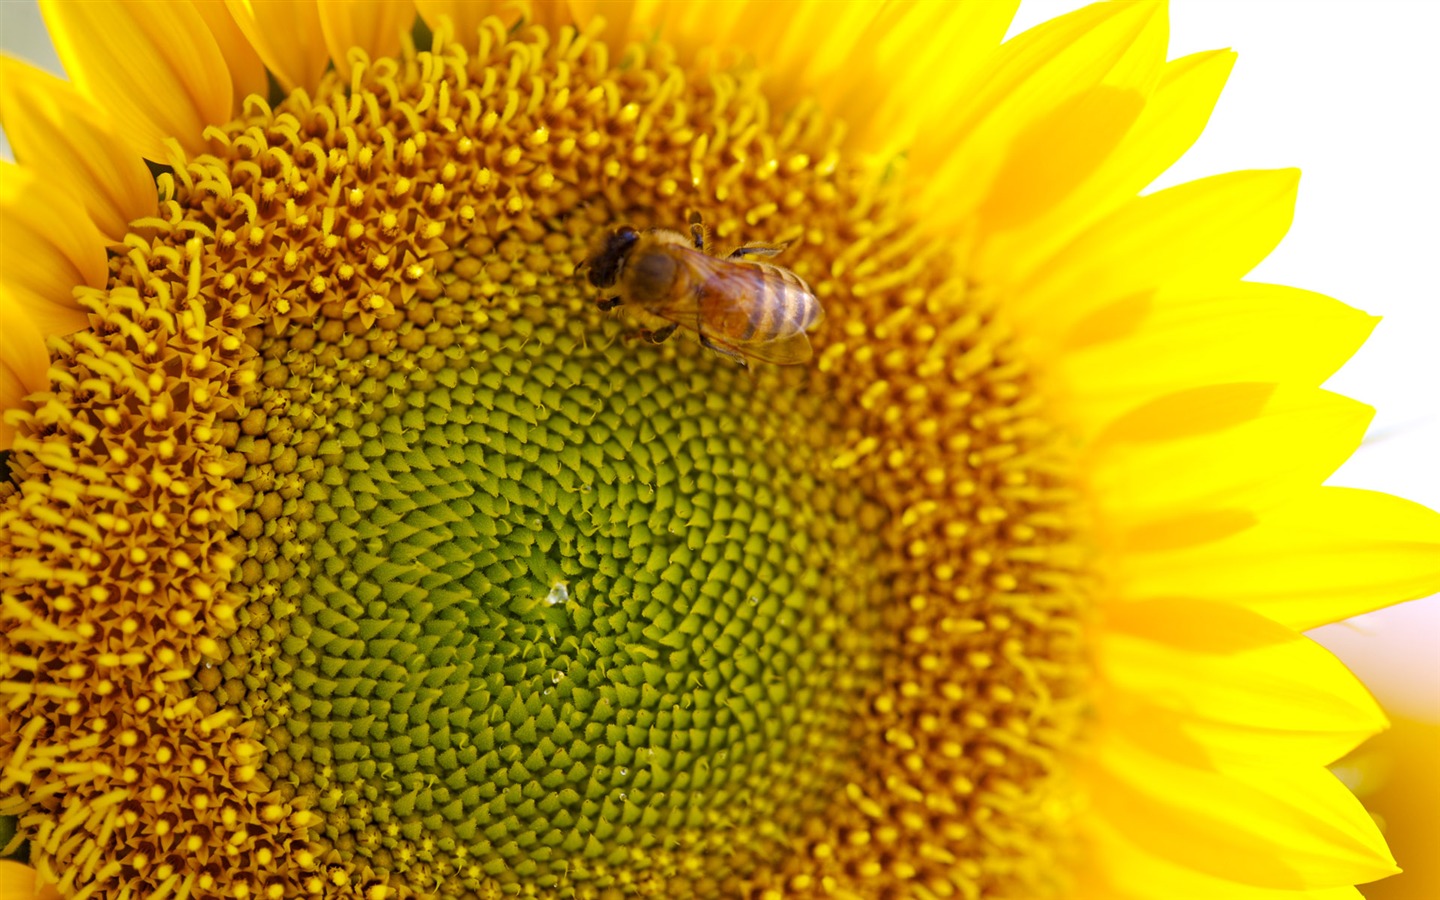 Sunny sunflower photo HD Wallpapers #36 - 1440x900